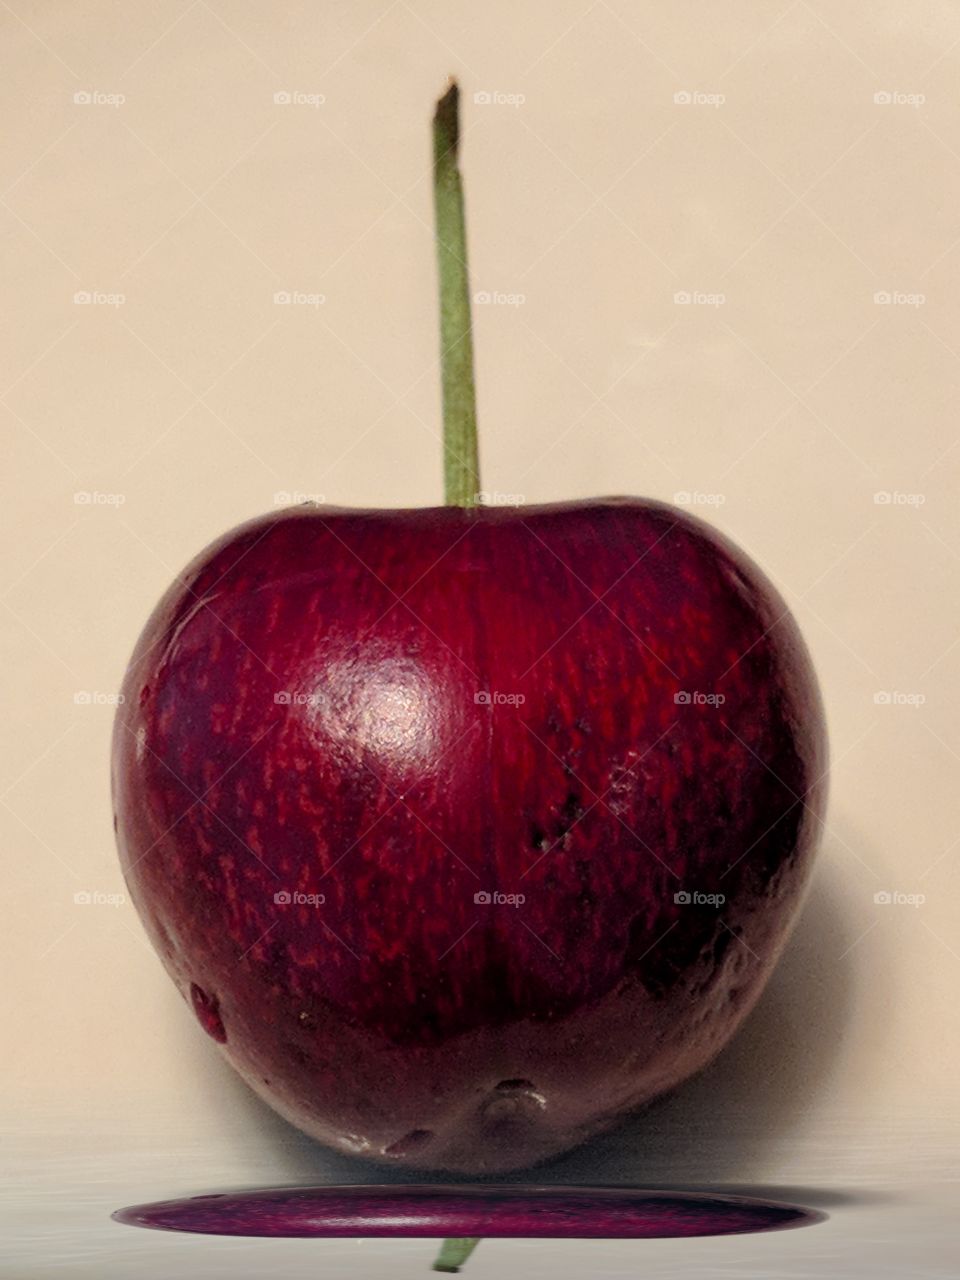 A reflection of a cherry